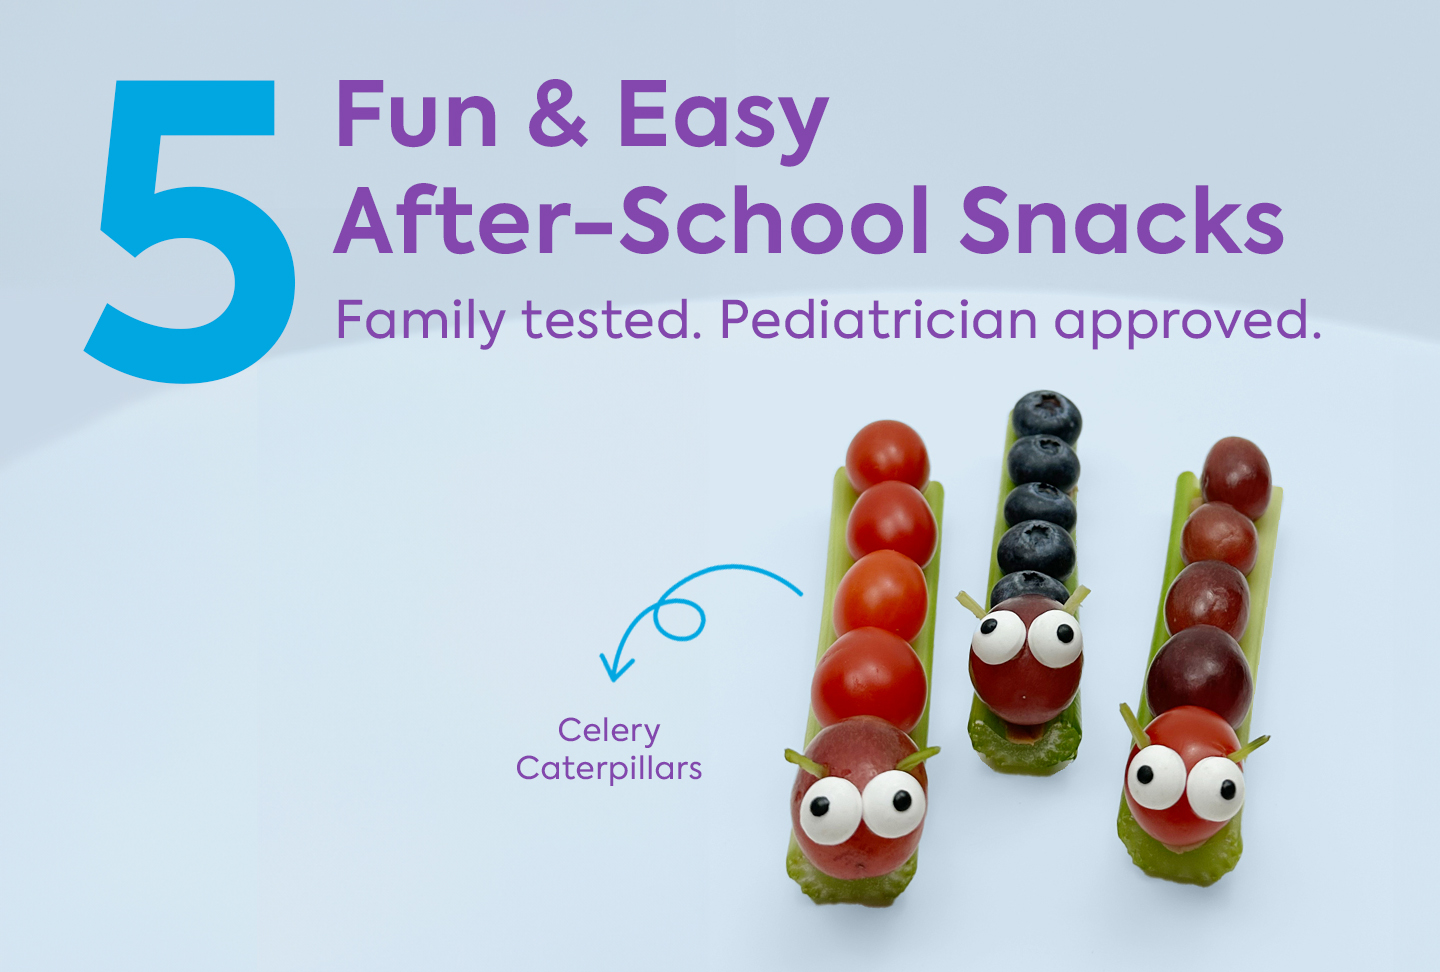 Photo of celery caterpillars. Text reads "5 Fun & Easy After-School Snacks. Family tested. Pediatrician approved."